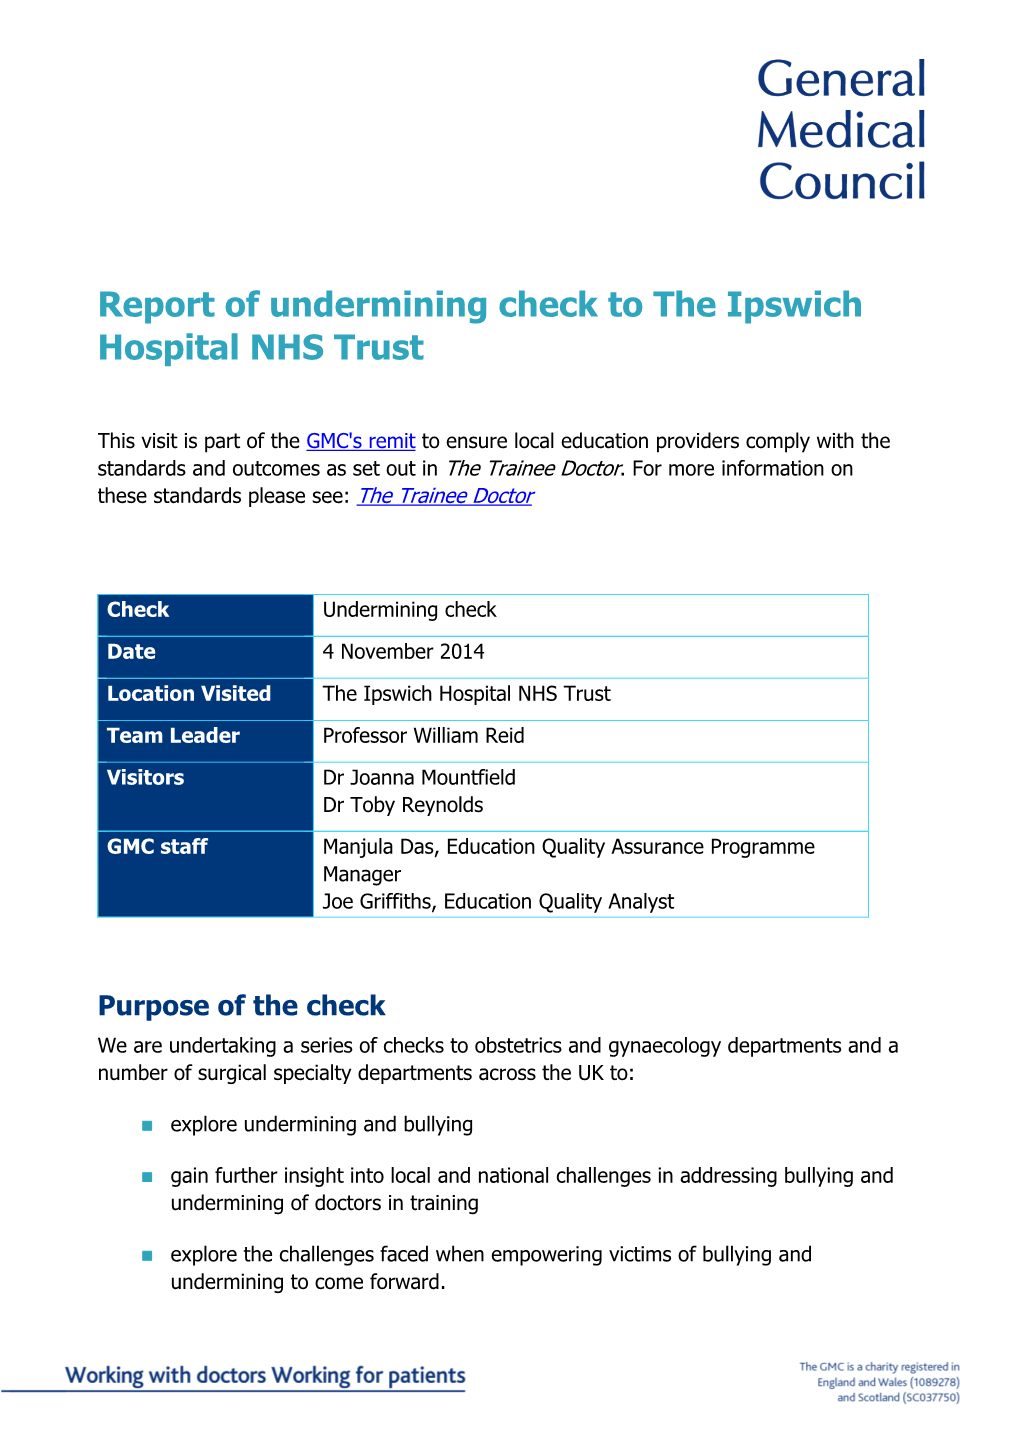 Report of Undermining Check to the Ipswich Hospital NHS Trust